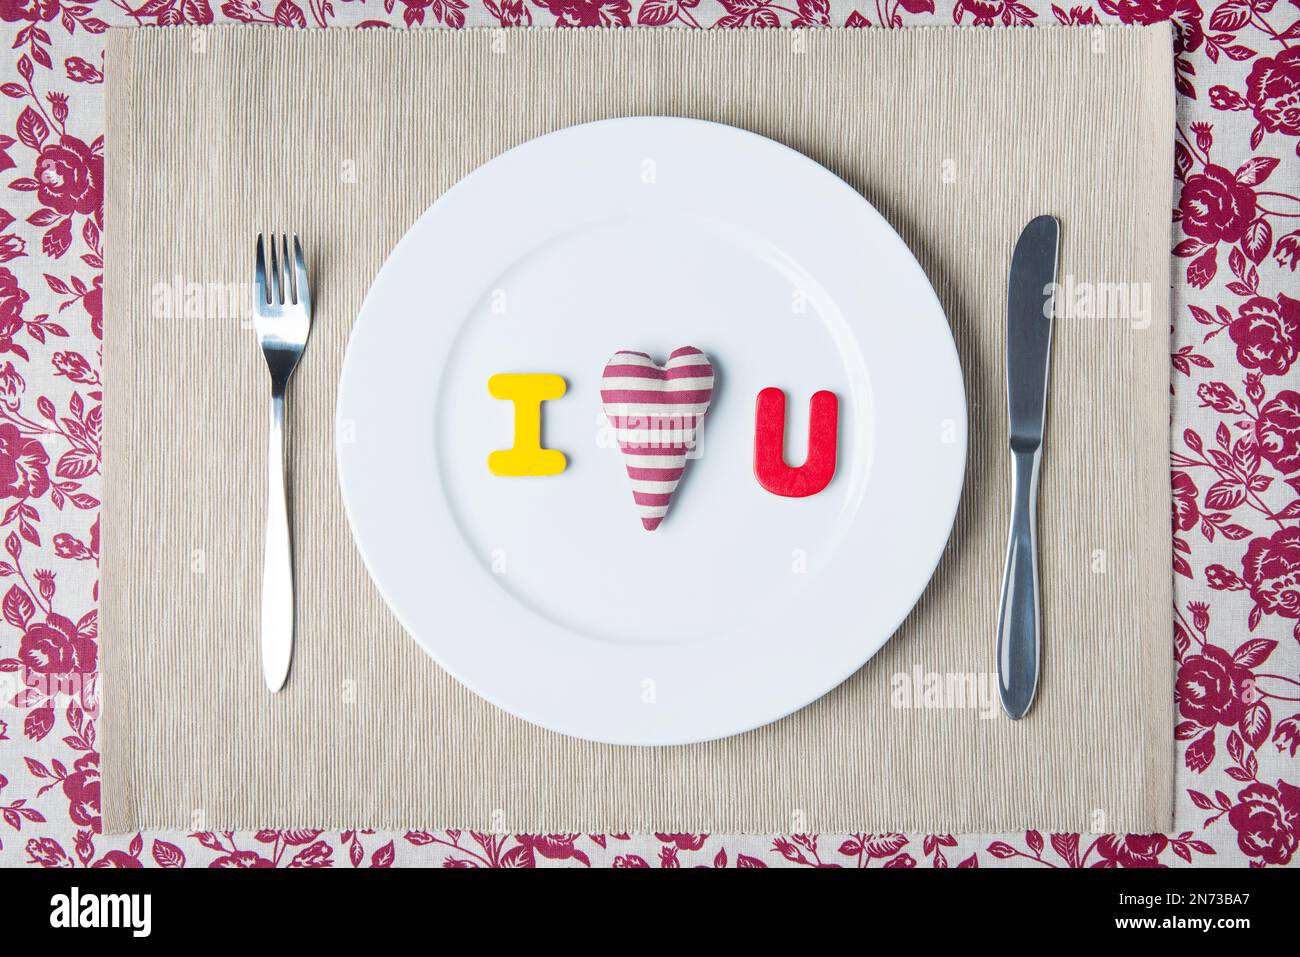 Valentine dinner concept - I LOVE YOU message on white plate Stock Photo